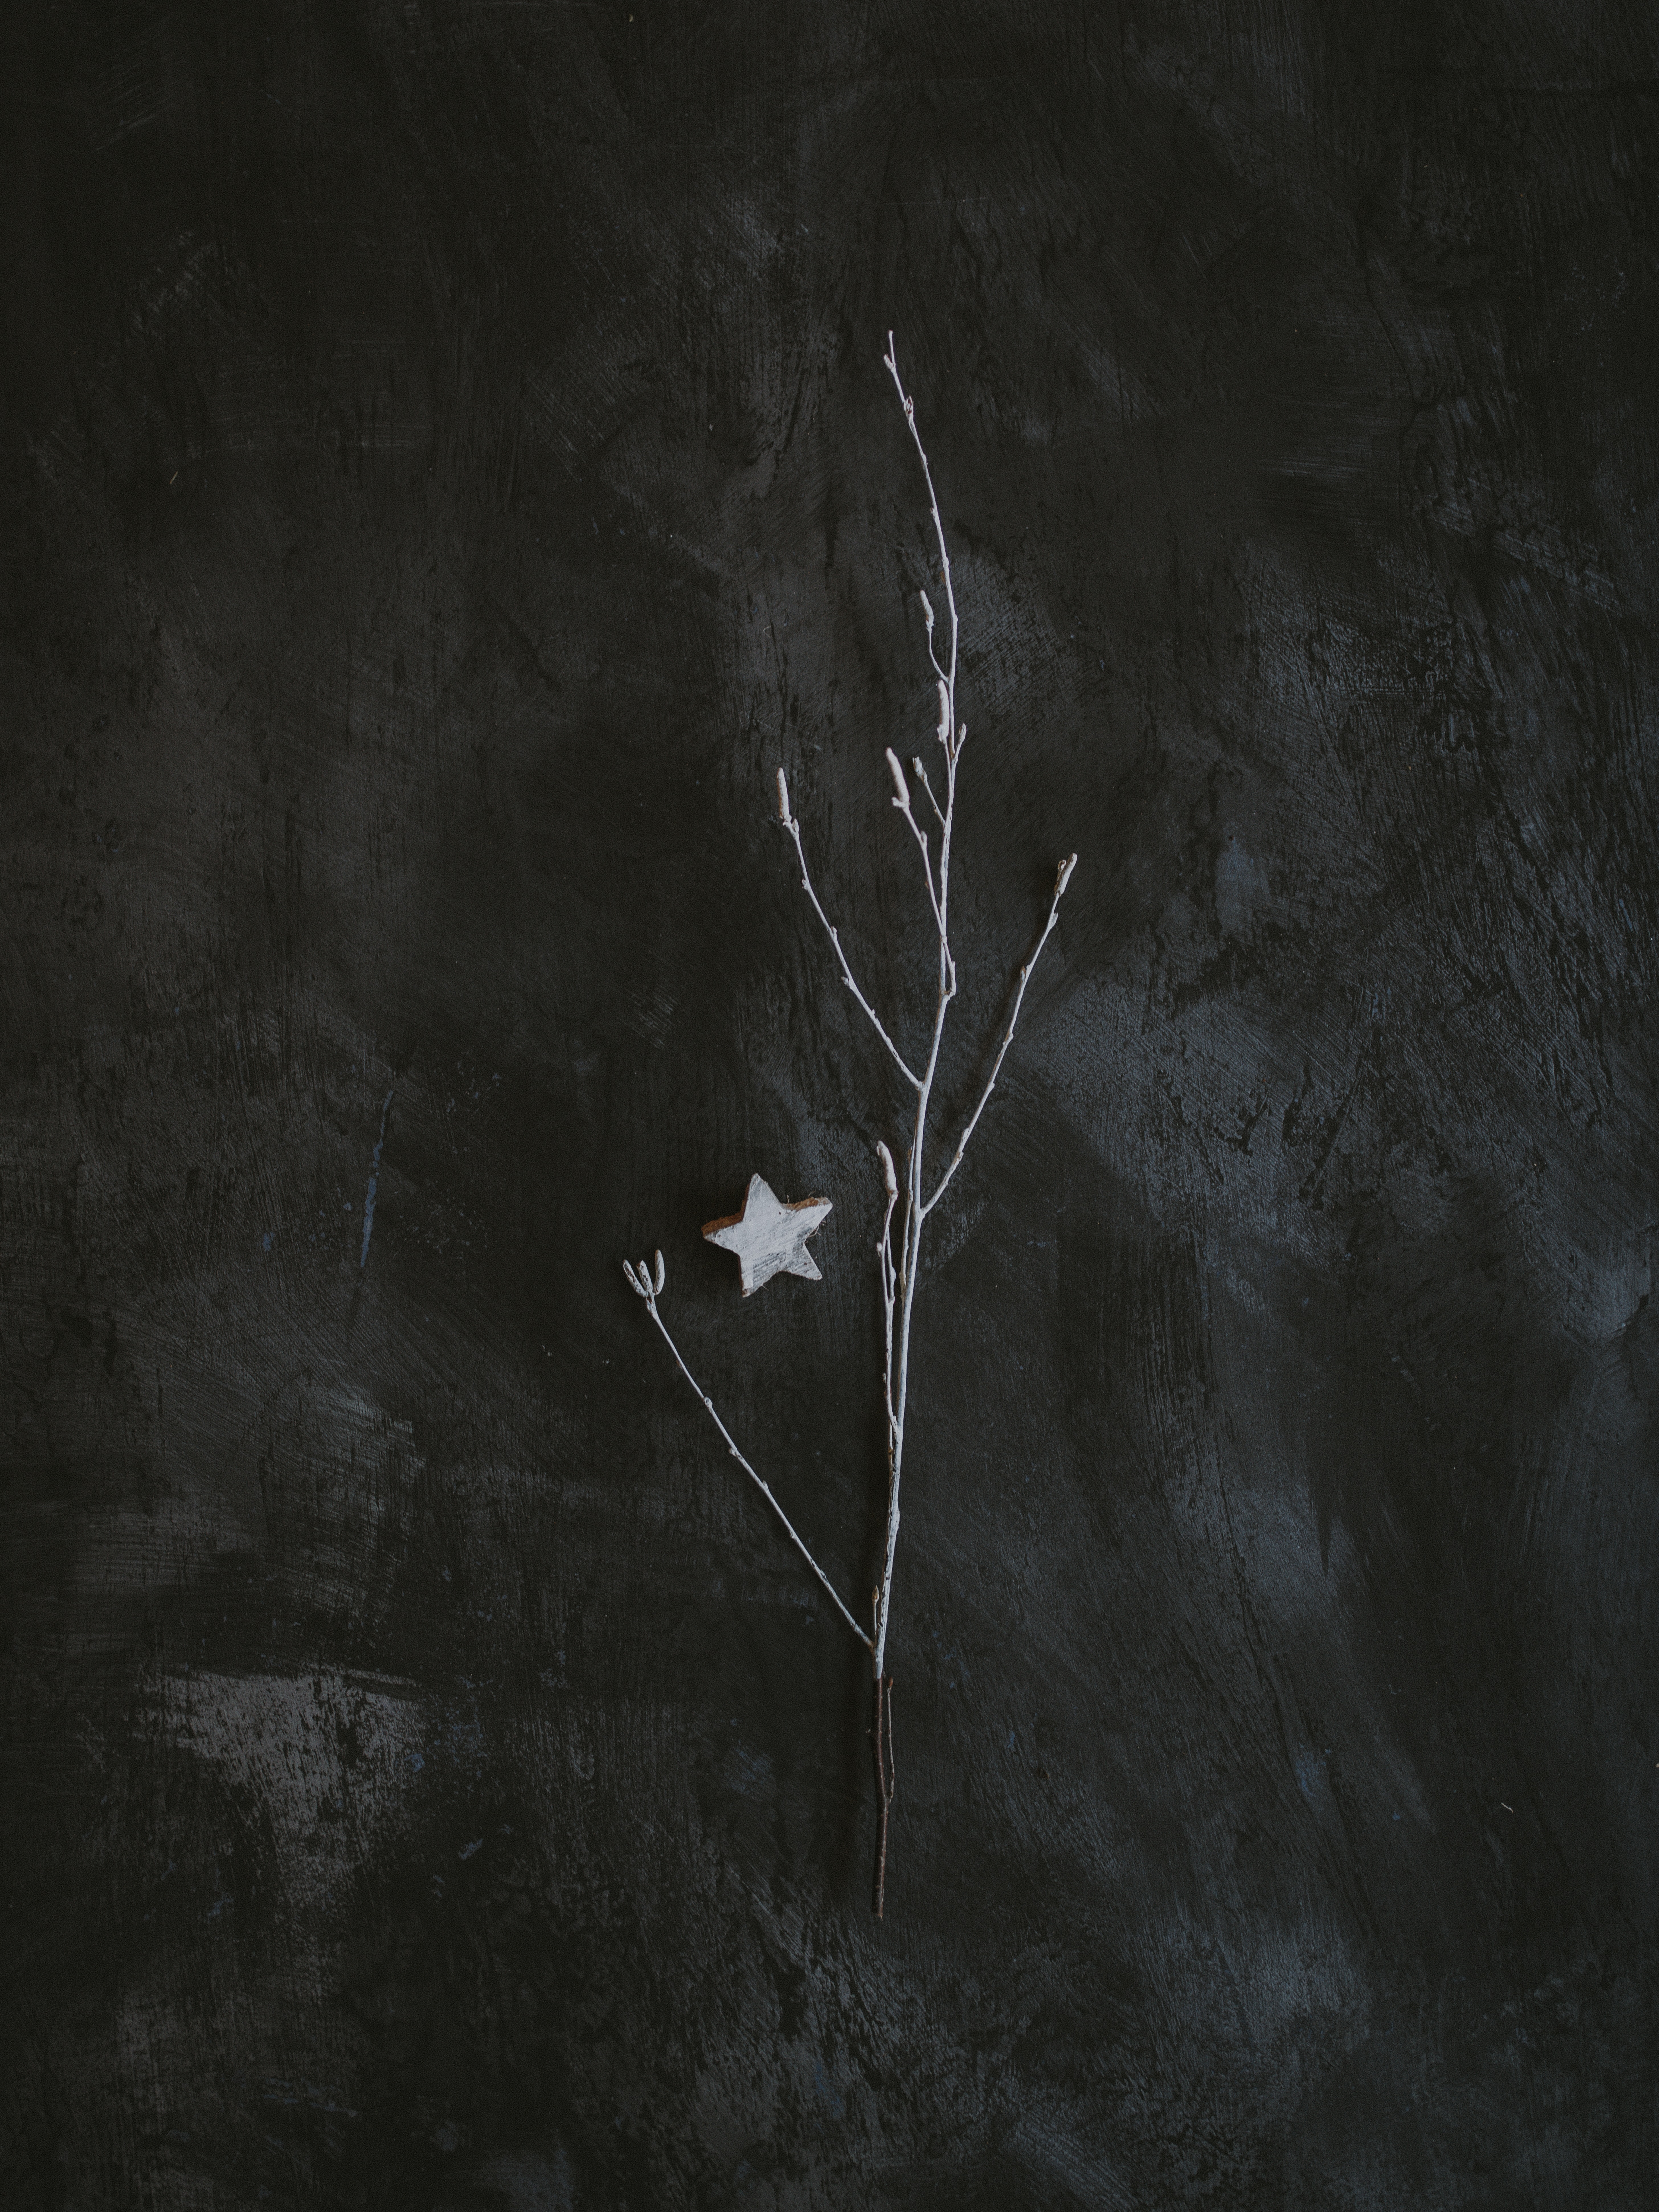 69119 download wallpaper minimalism, miscellanea, miscellaneous, branch, grey, star screensavers and pictures for free